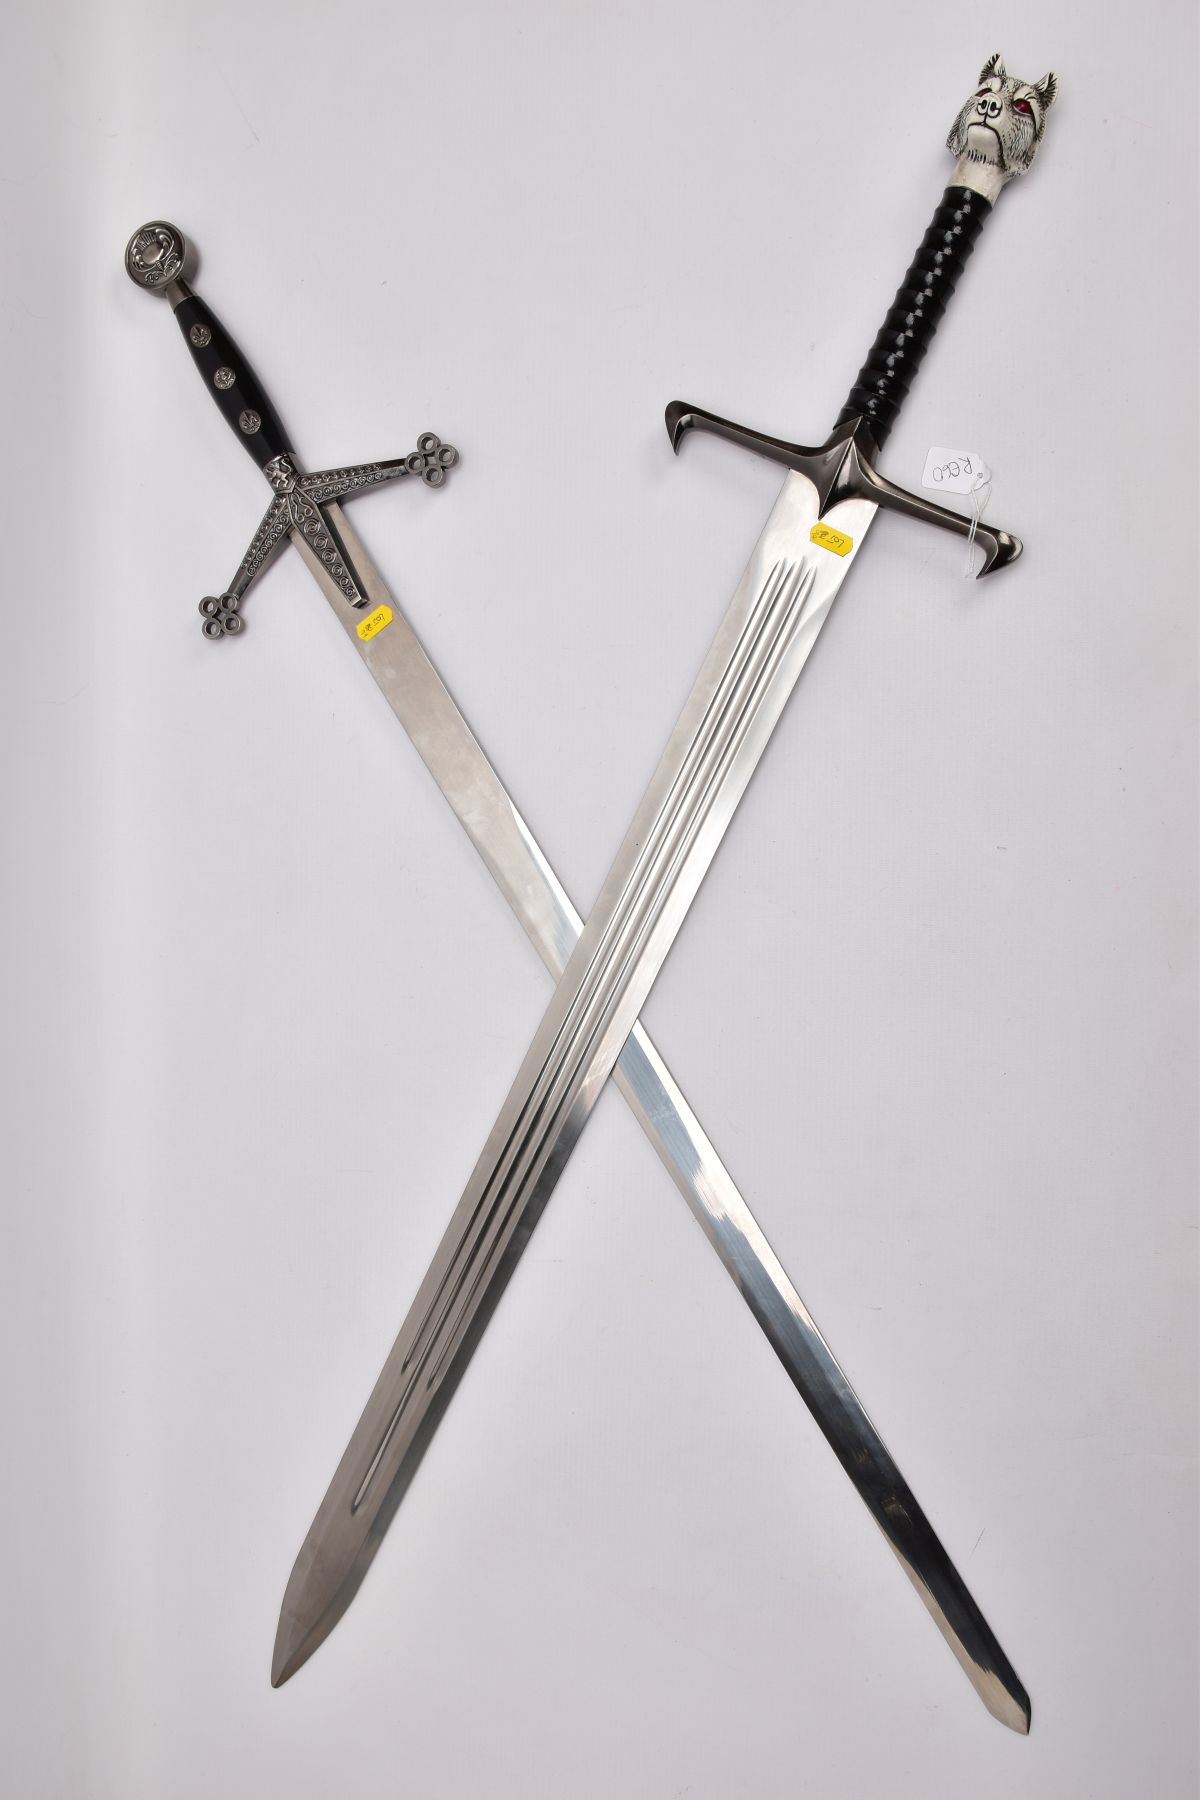 TWO REPLICA COPY SWORDS a Medieval style approximately 83cm length blade, angled downward cross-